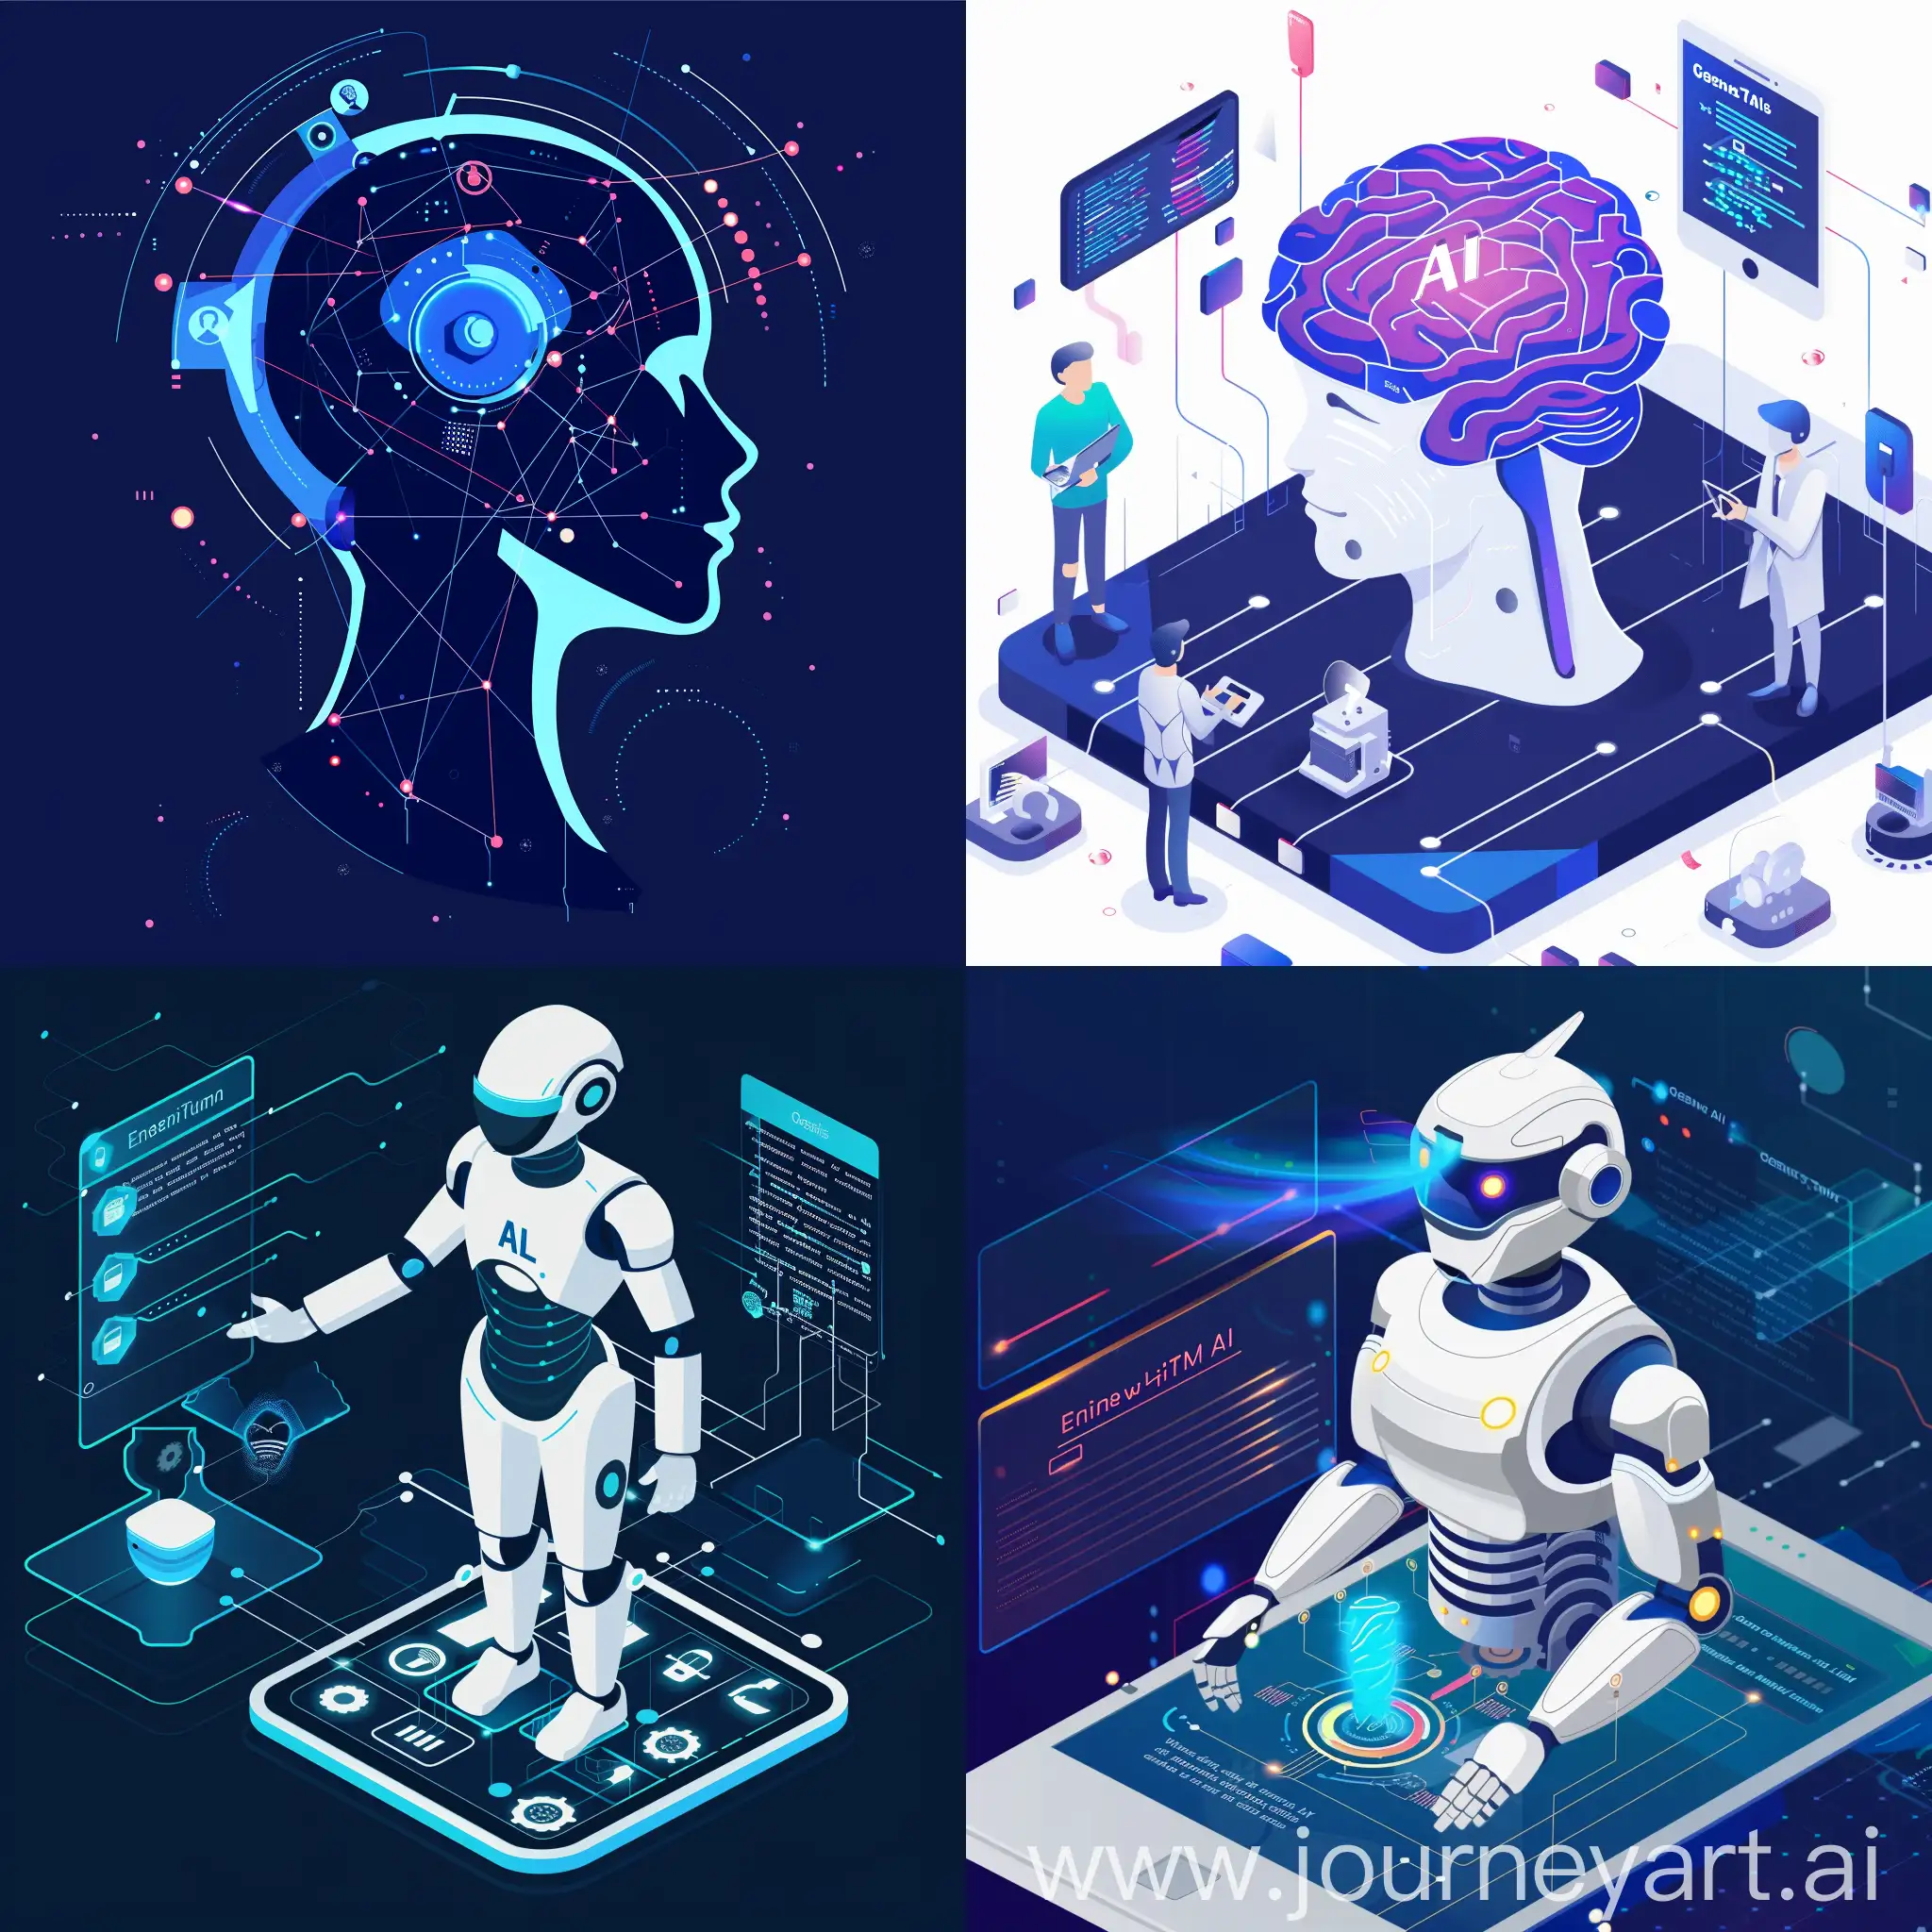 Generate a very professional image based on these descriptions:  "Enhance AI with Fine-Tuning"                          "Discover the power of LLM fine-tuning to tailor OpenAI models to your needs using datasets from Genesys Cloud knowledge bases. Our application guides you through the fine-tuning process with advanced AI insights"